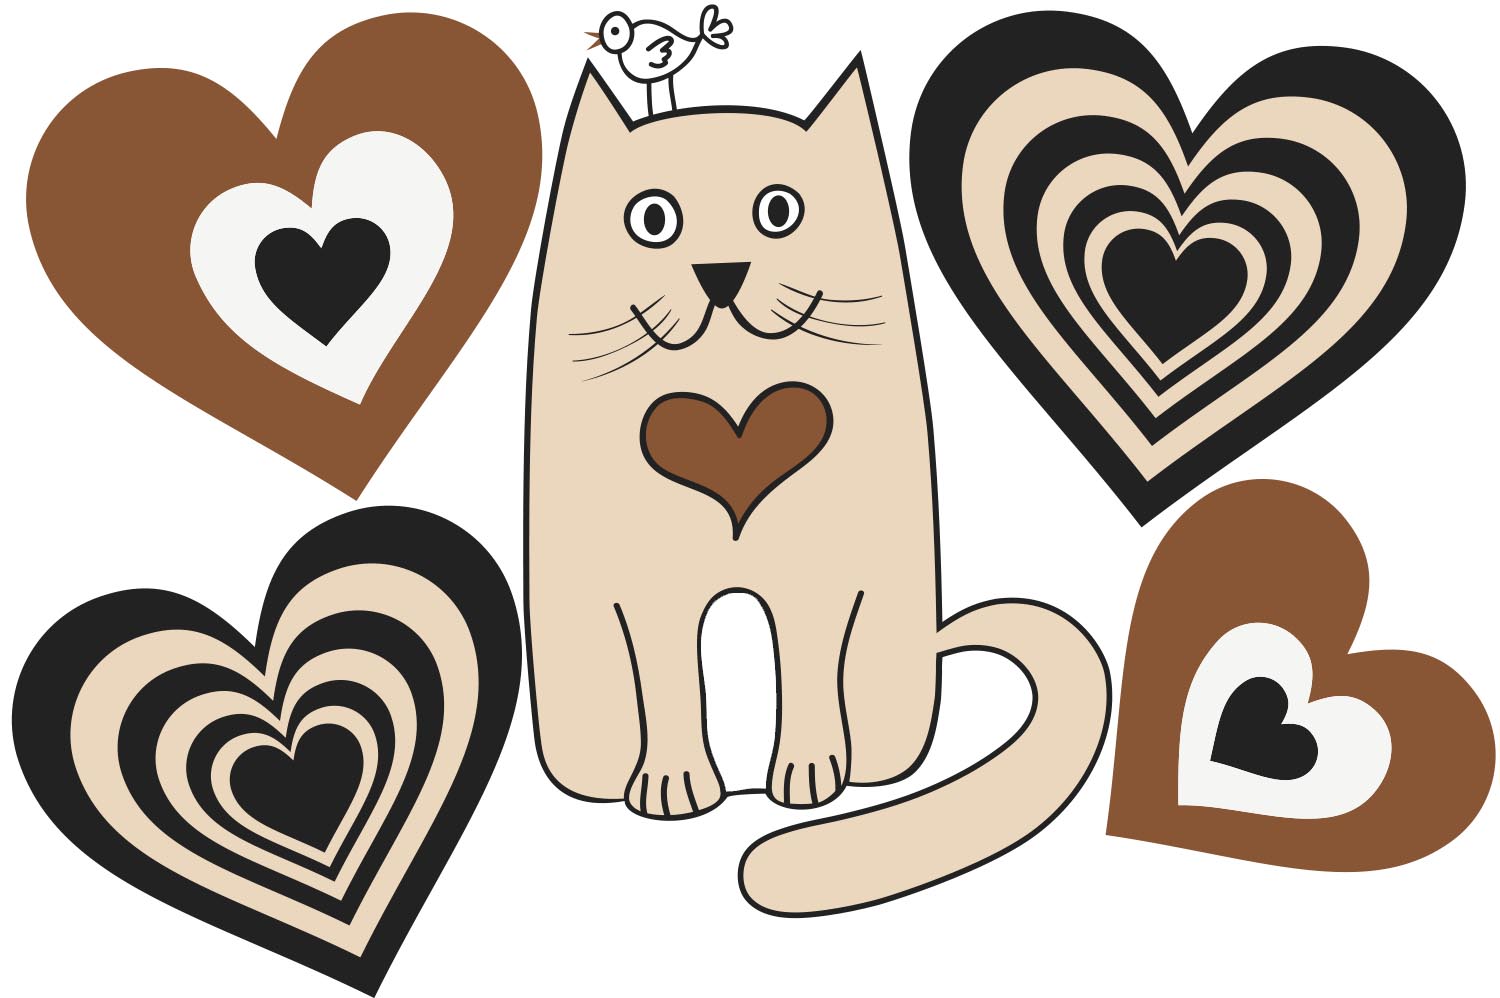 Adorable Beige Kitty with hearts Wall, Wall Decal Sticker, Removable, 5 Separate decals